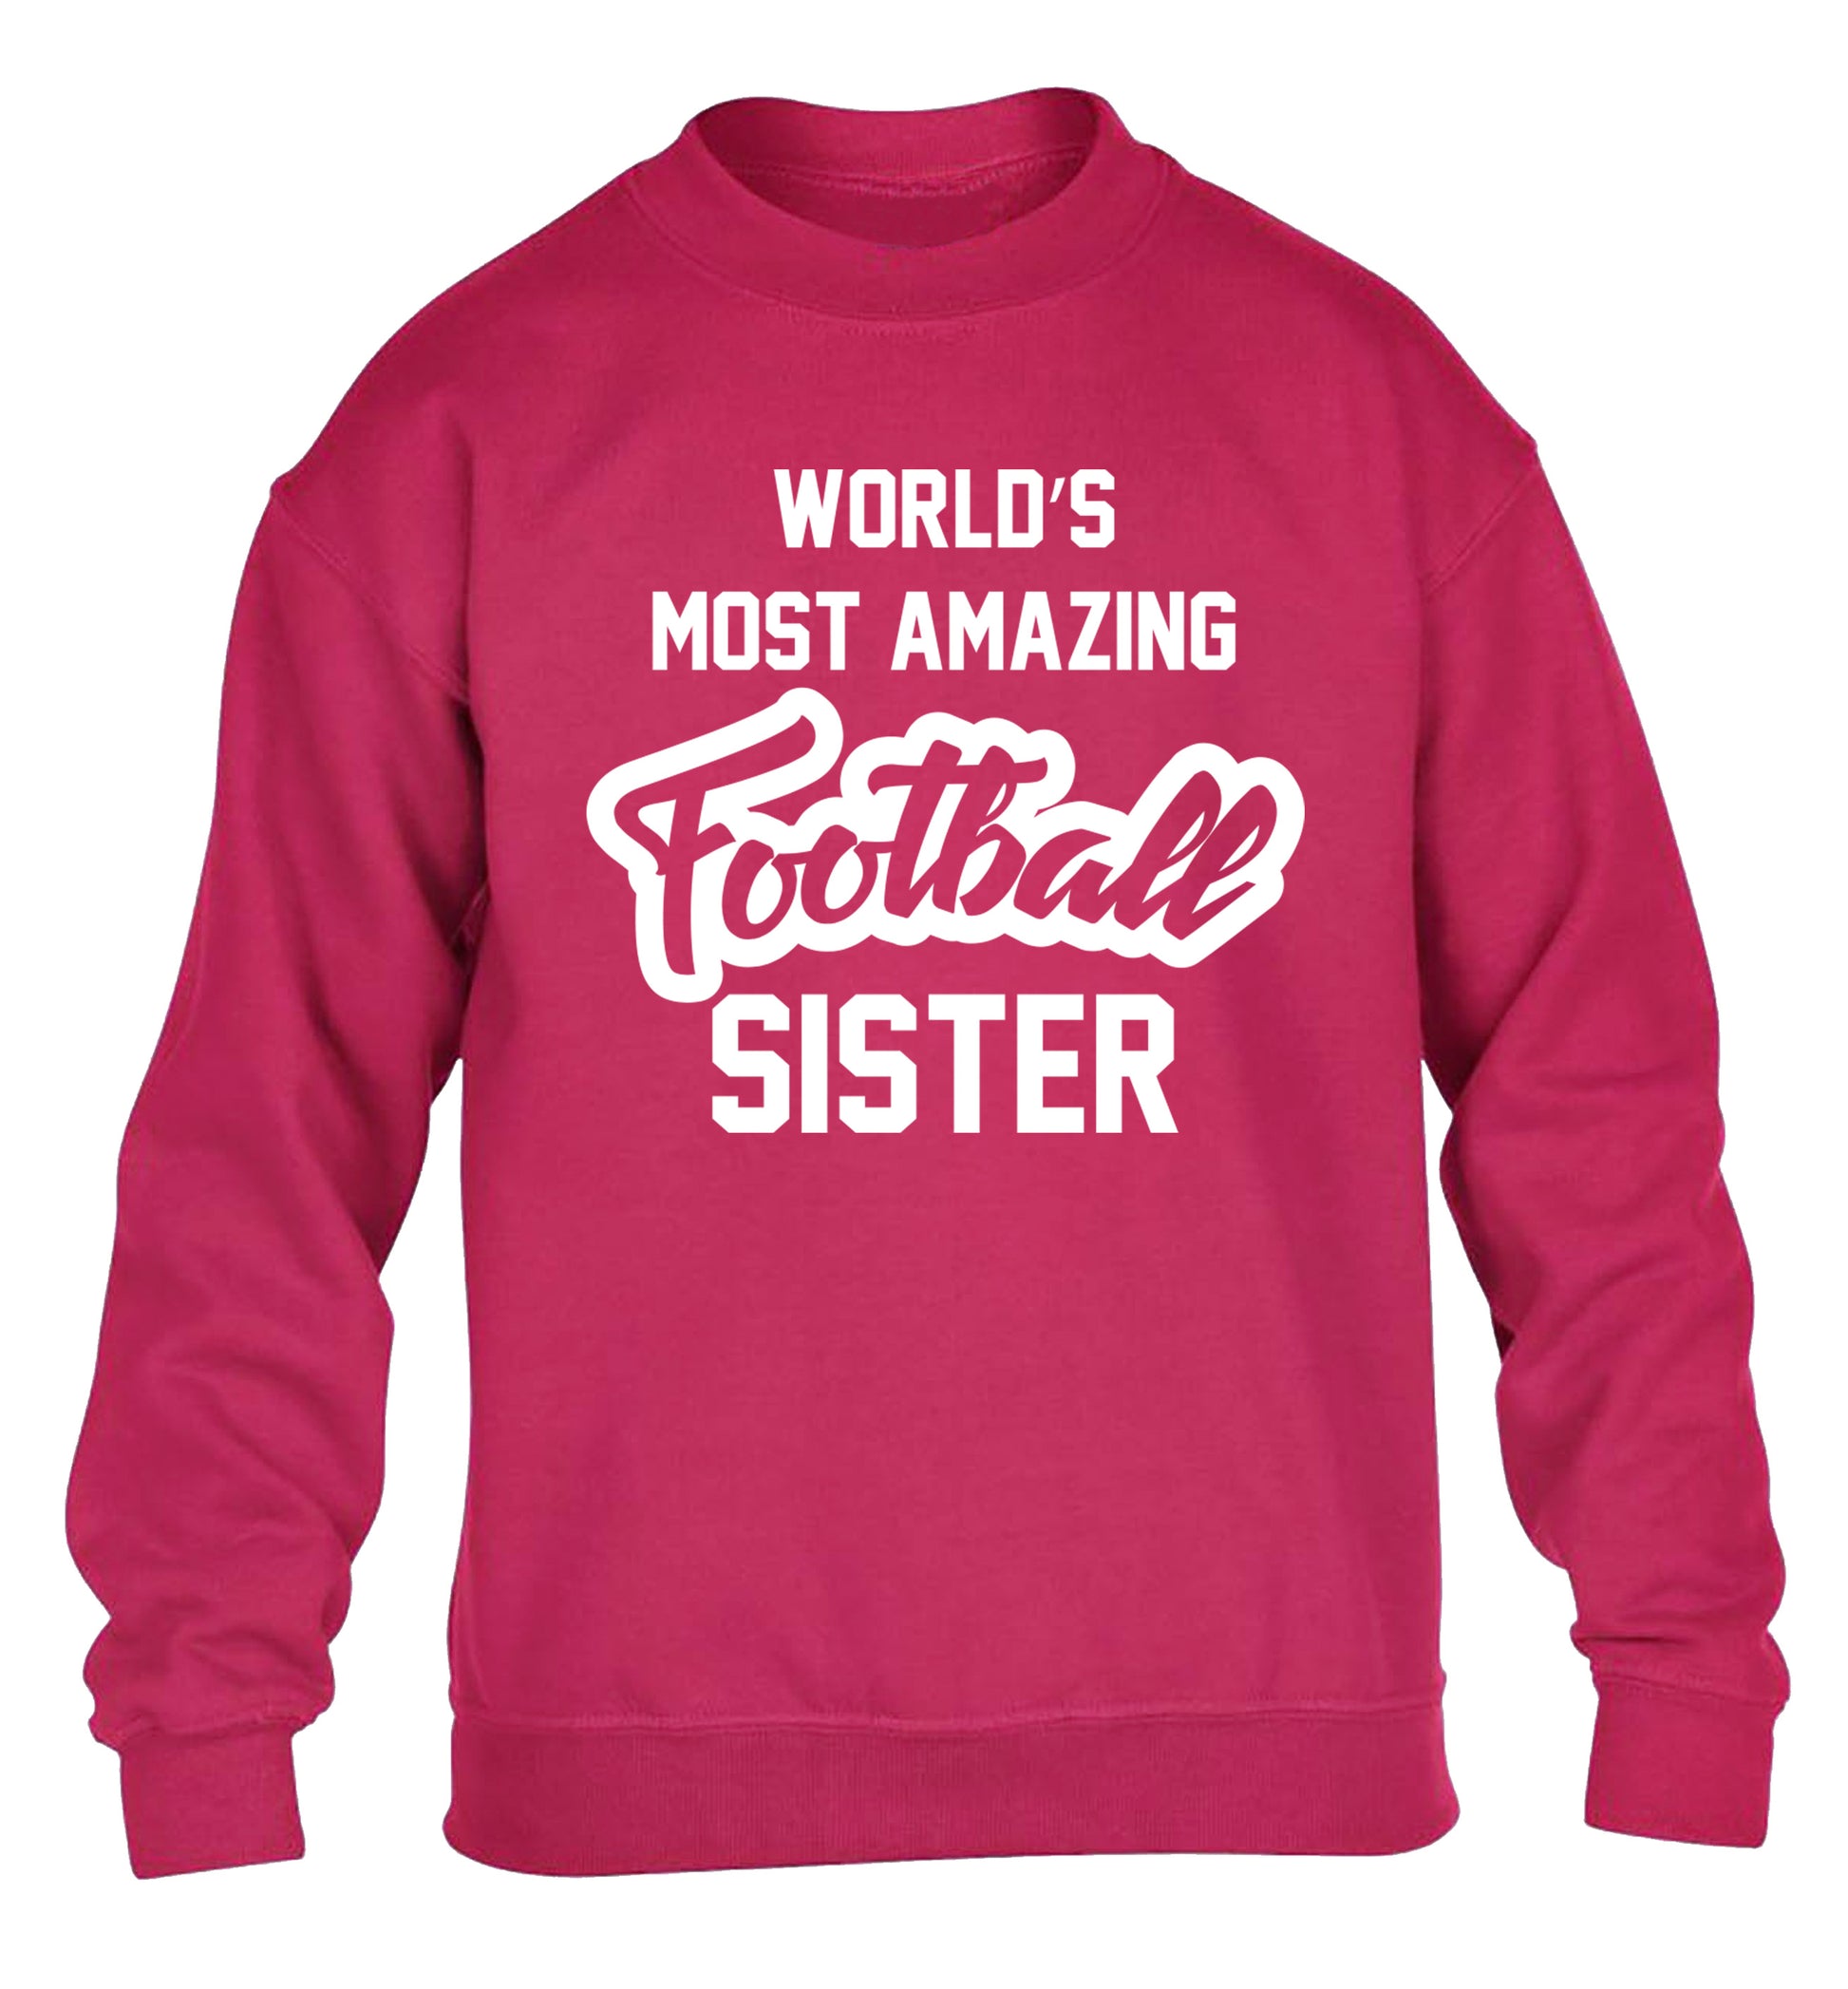 Worlds most amazing football sister children's pink sweater 12-14 Years